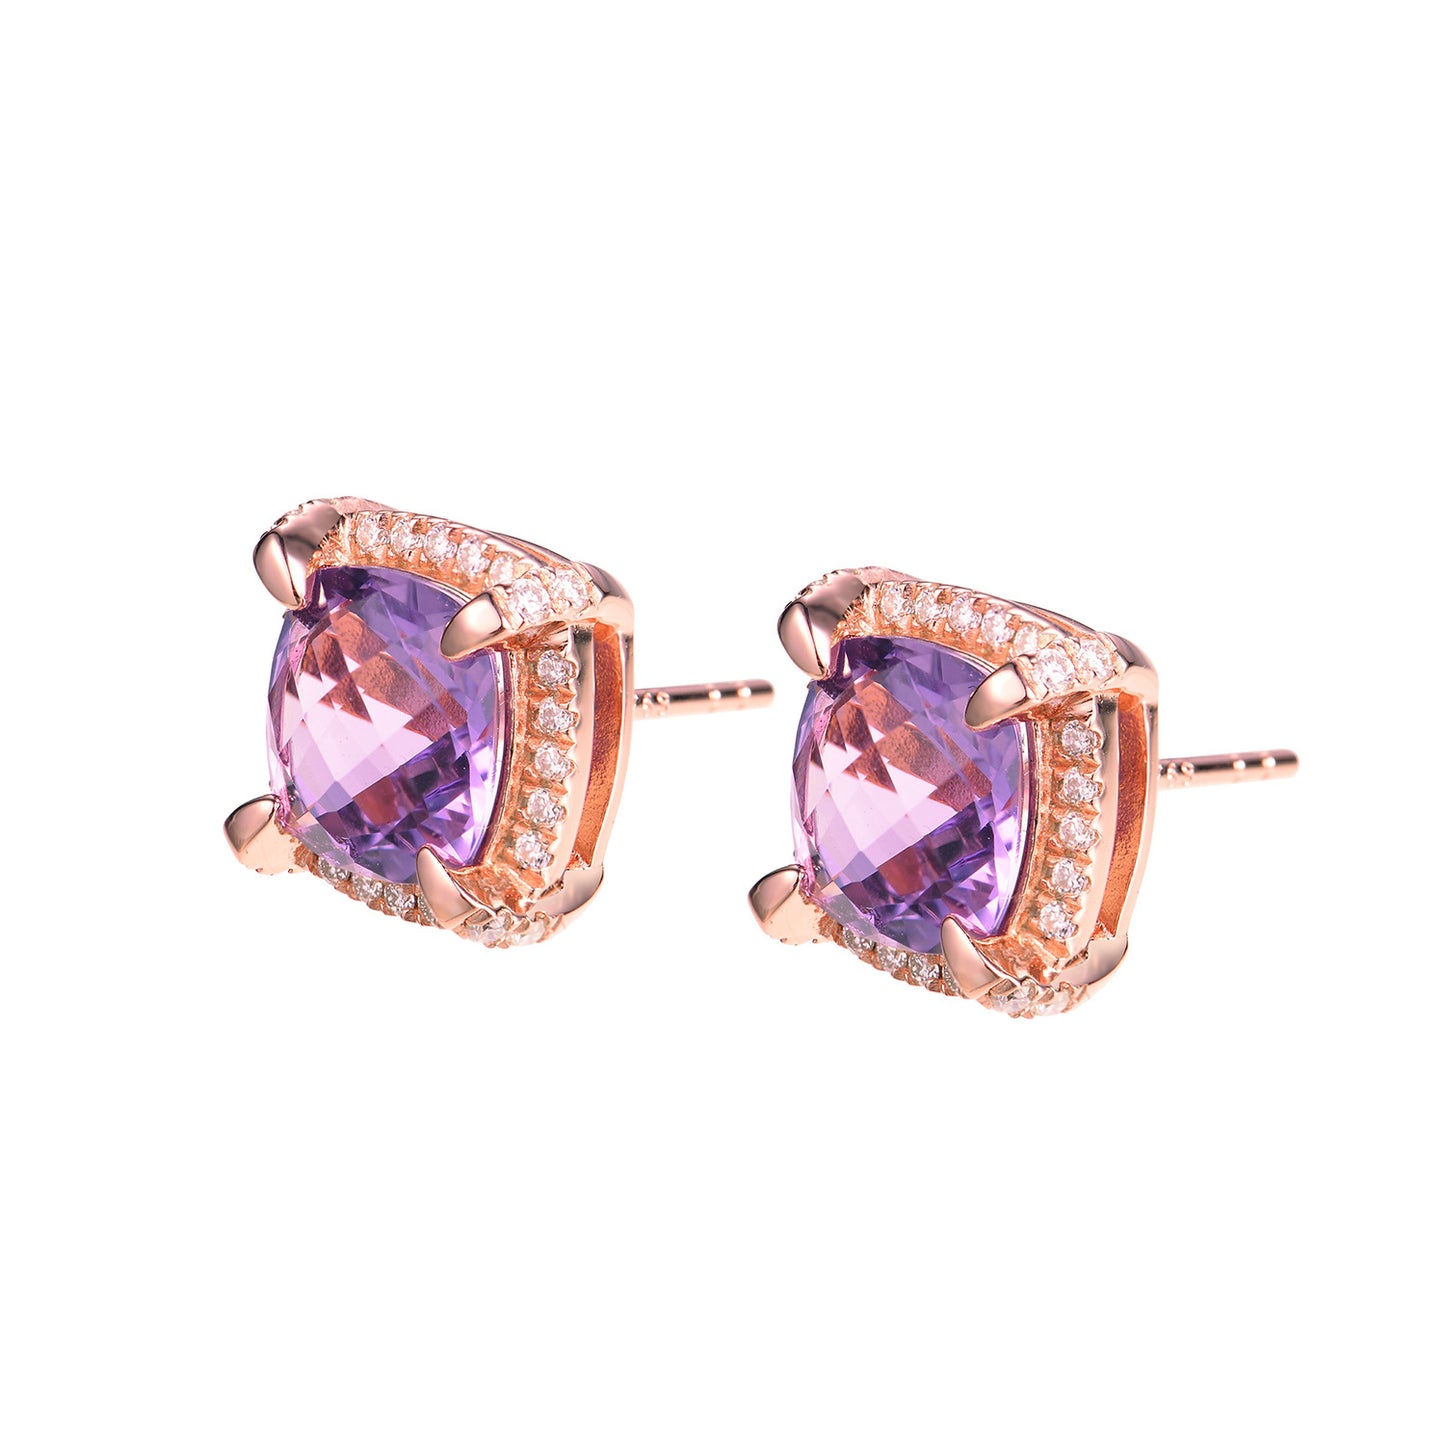 Soleste Halo Square Natural Amethyst Silver Stud Earrings